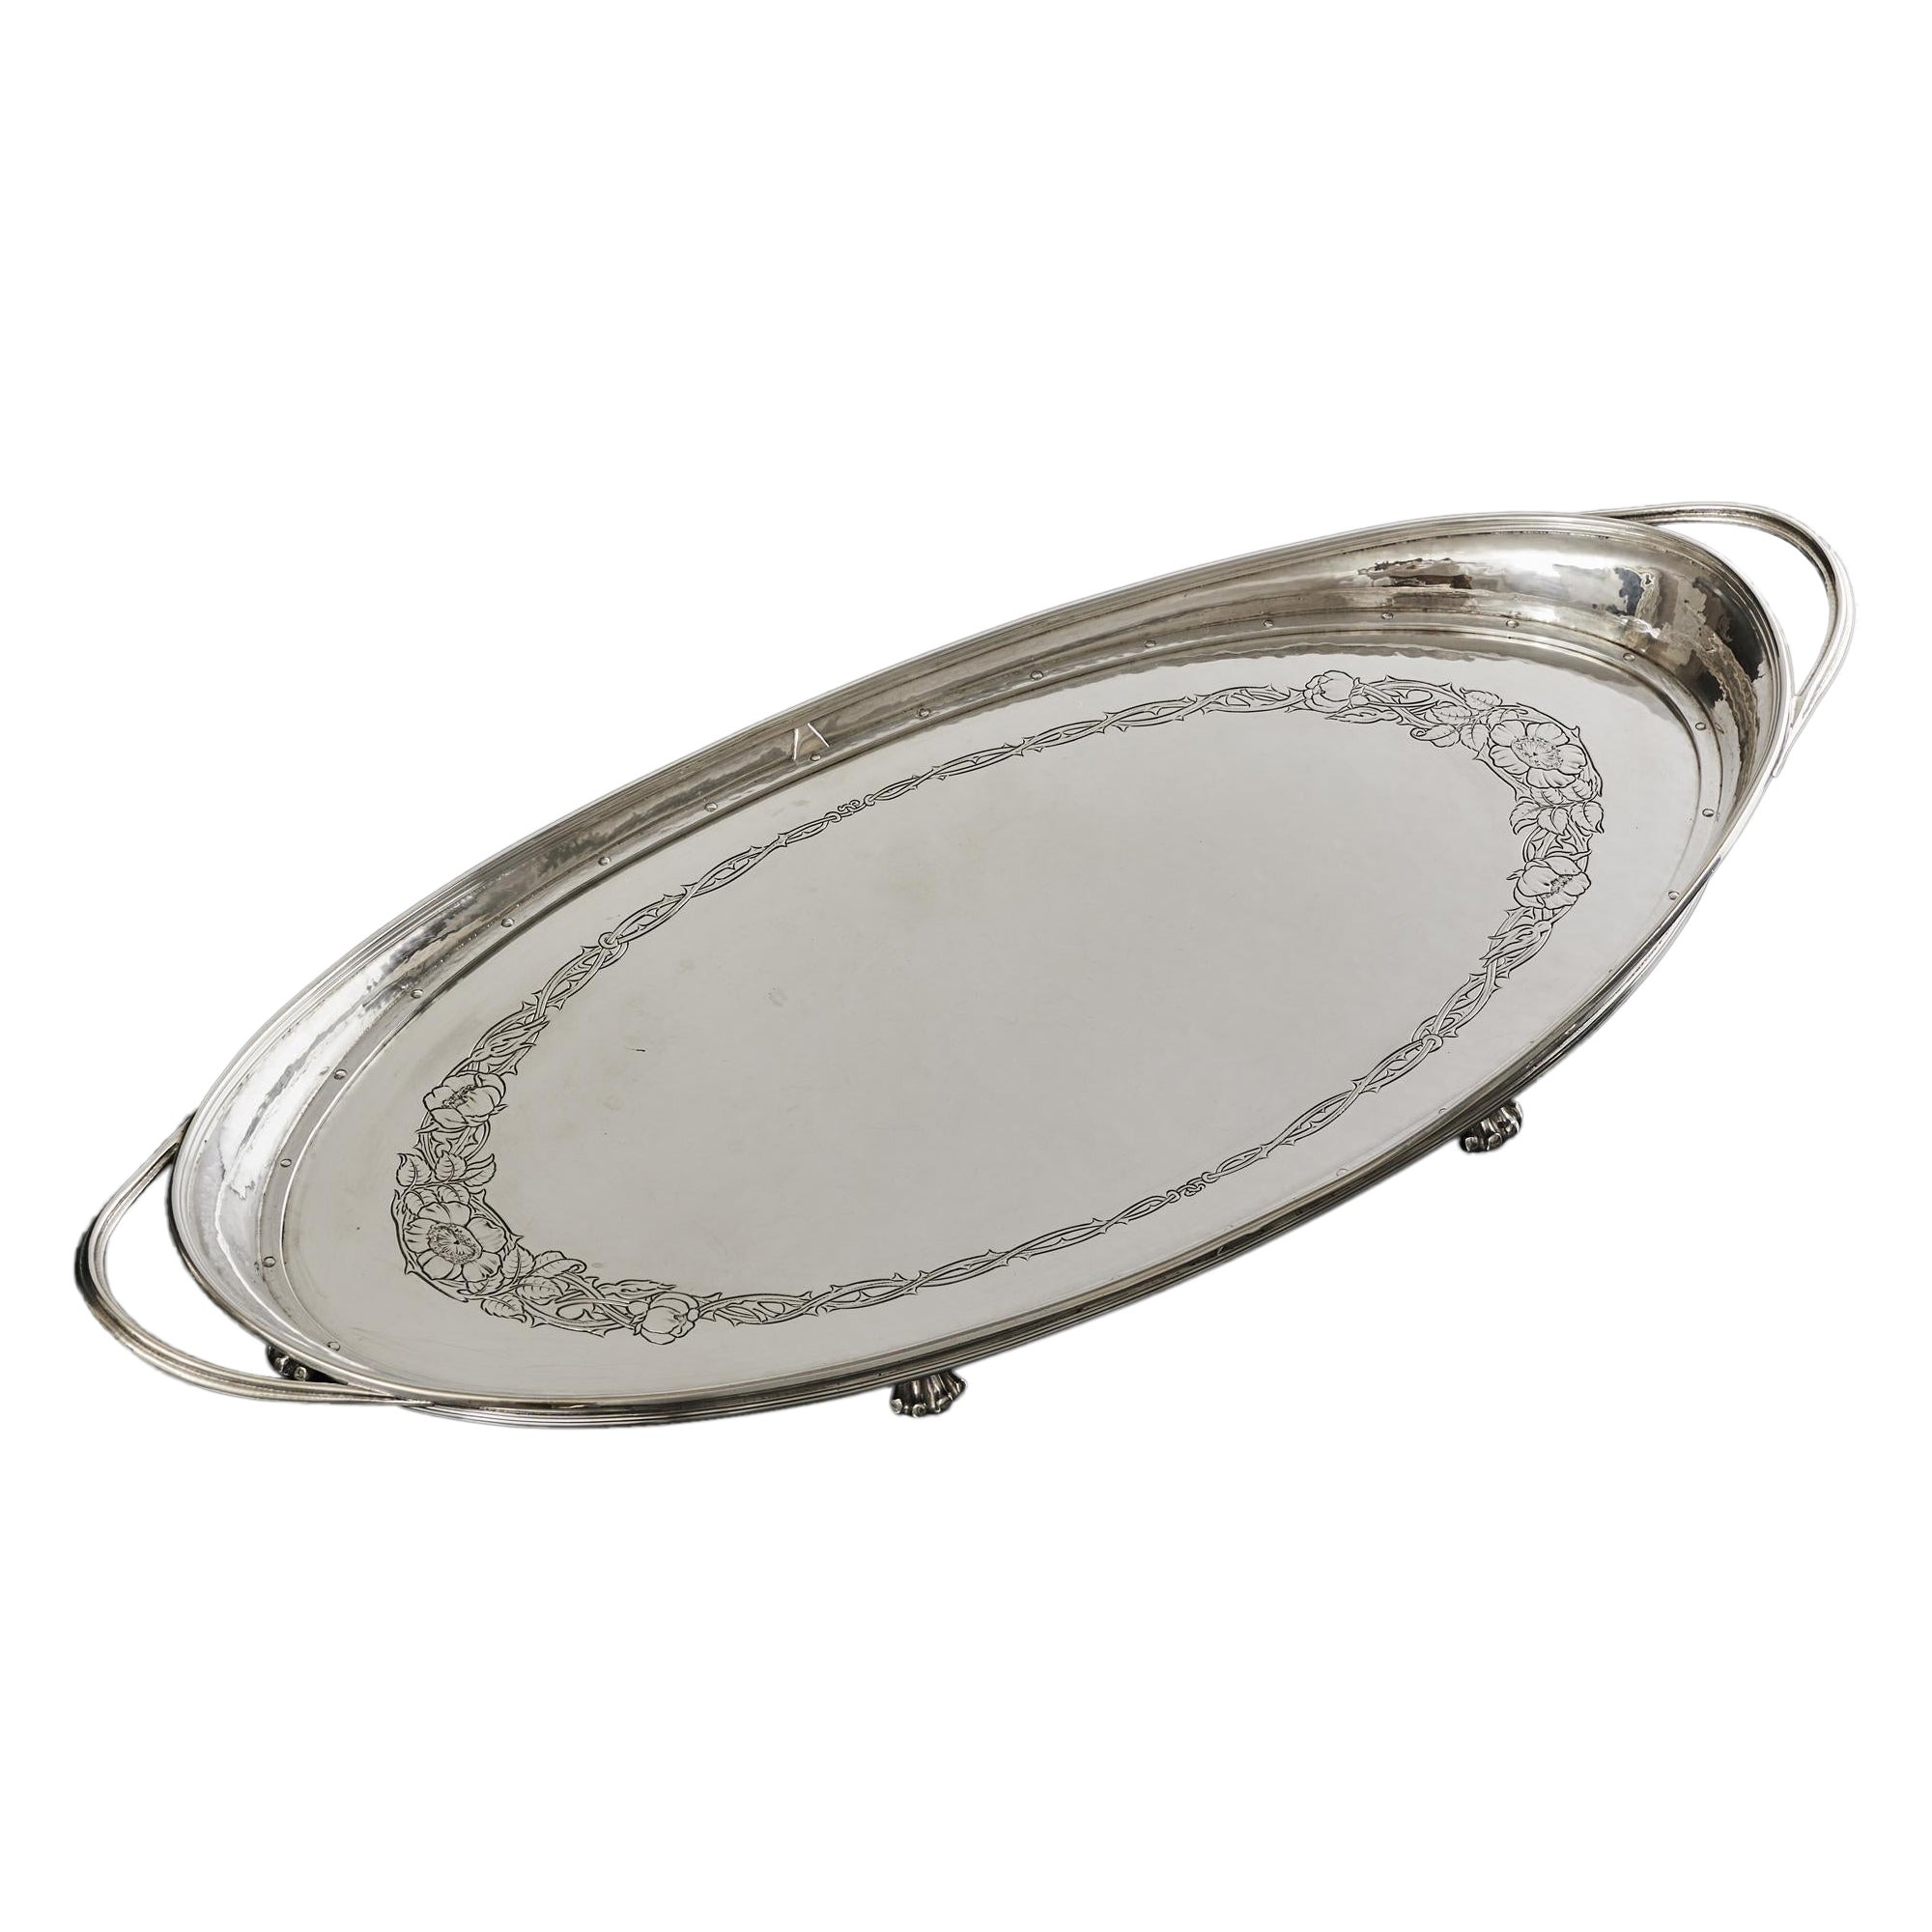 Two-handled navette-shaped silver serving tray For Sale